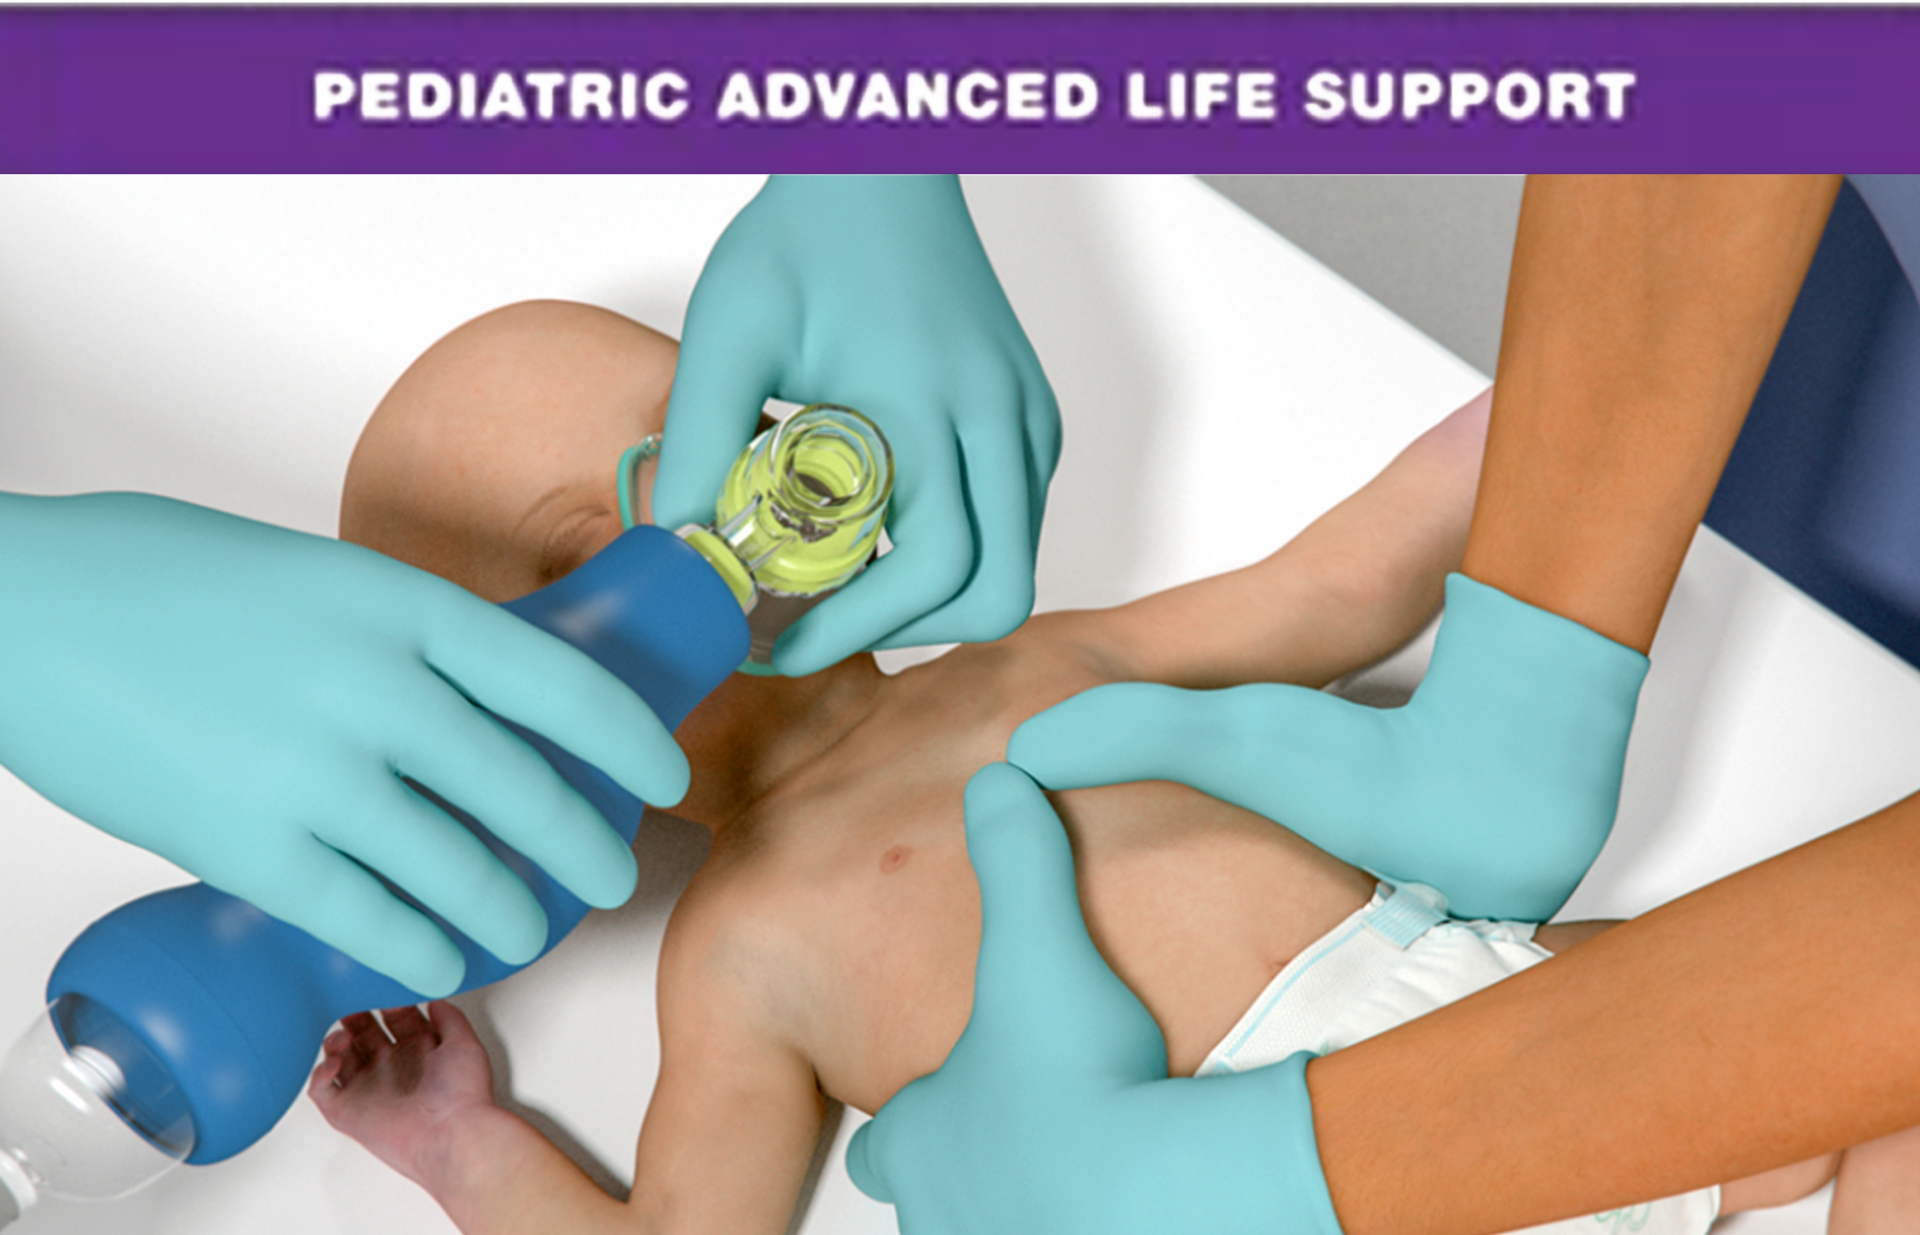 a poster for pediatric advanced life support with a picture of a baby